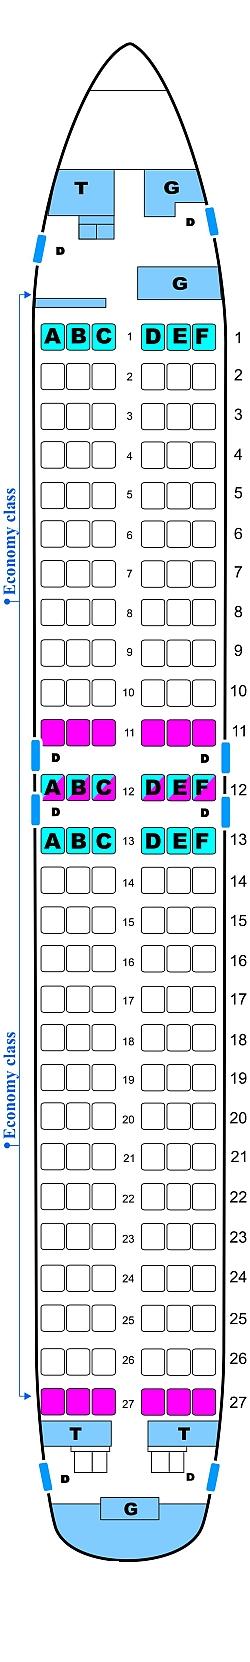 Seat map for Sky Airlines Boeing B737 400 162PAX